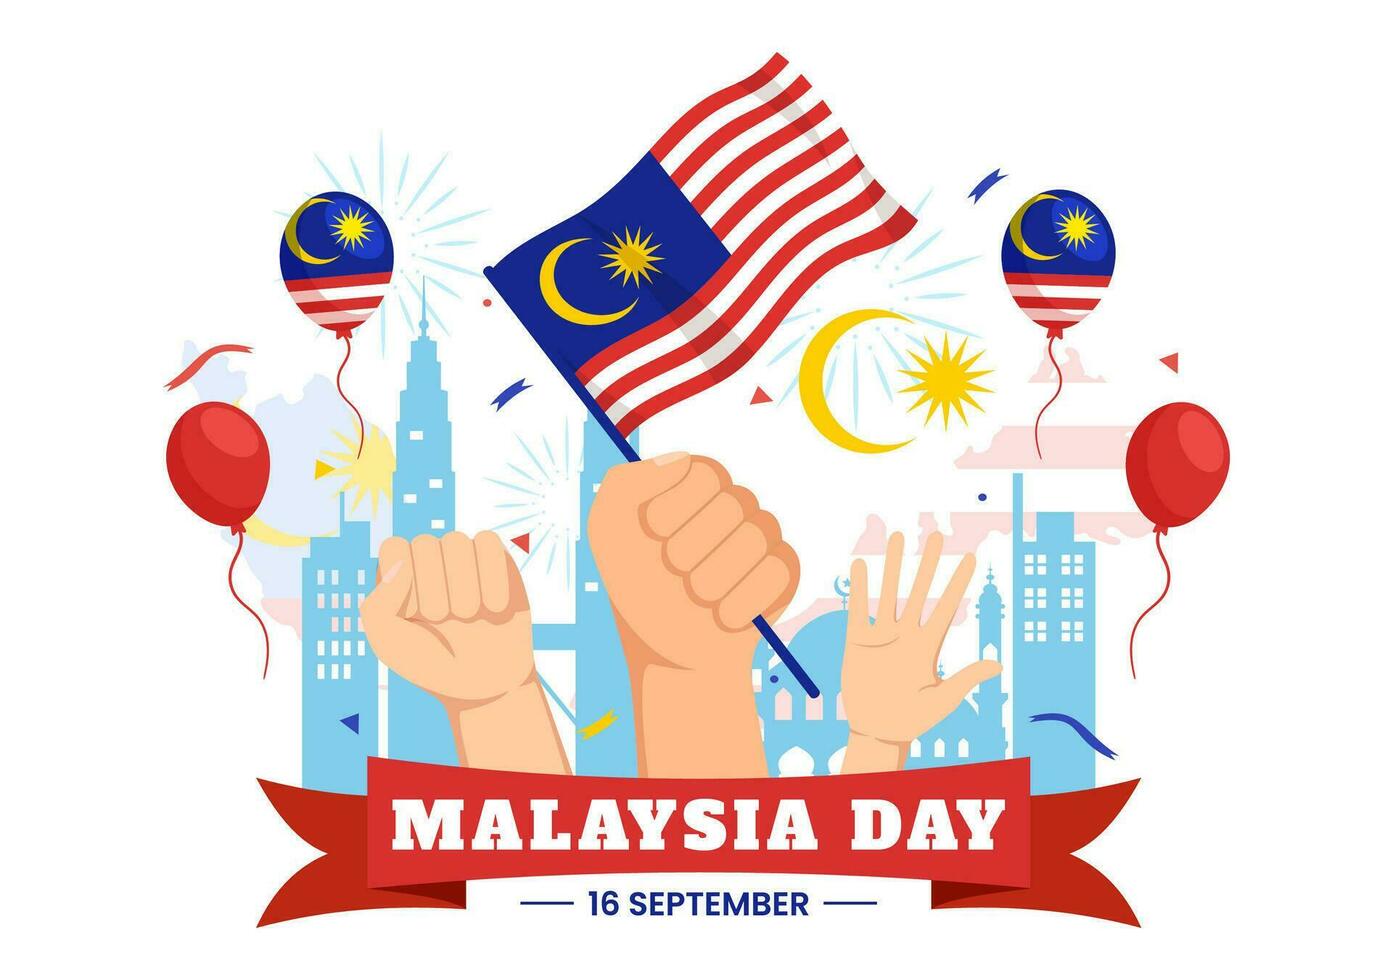 Happy Malaysia Day Celebration Vector Illustration on 16 September with Waving Flag and Twin Towers in Flat Cartoon Hand Drawn Templates